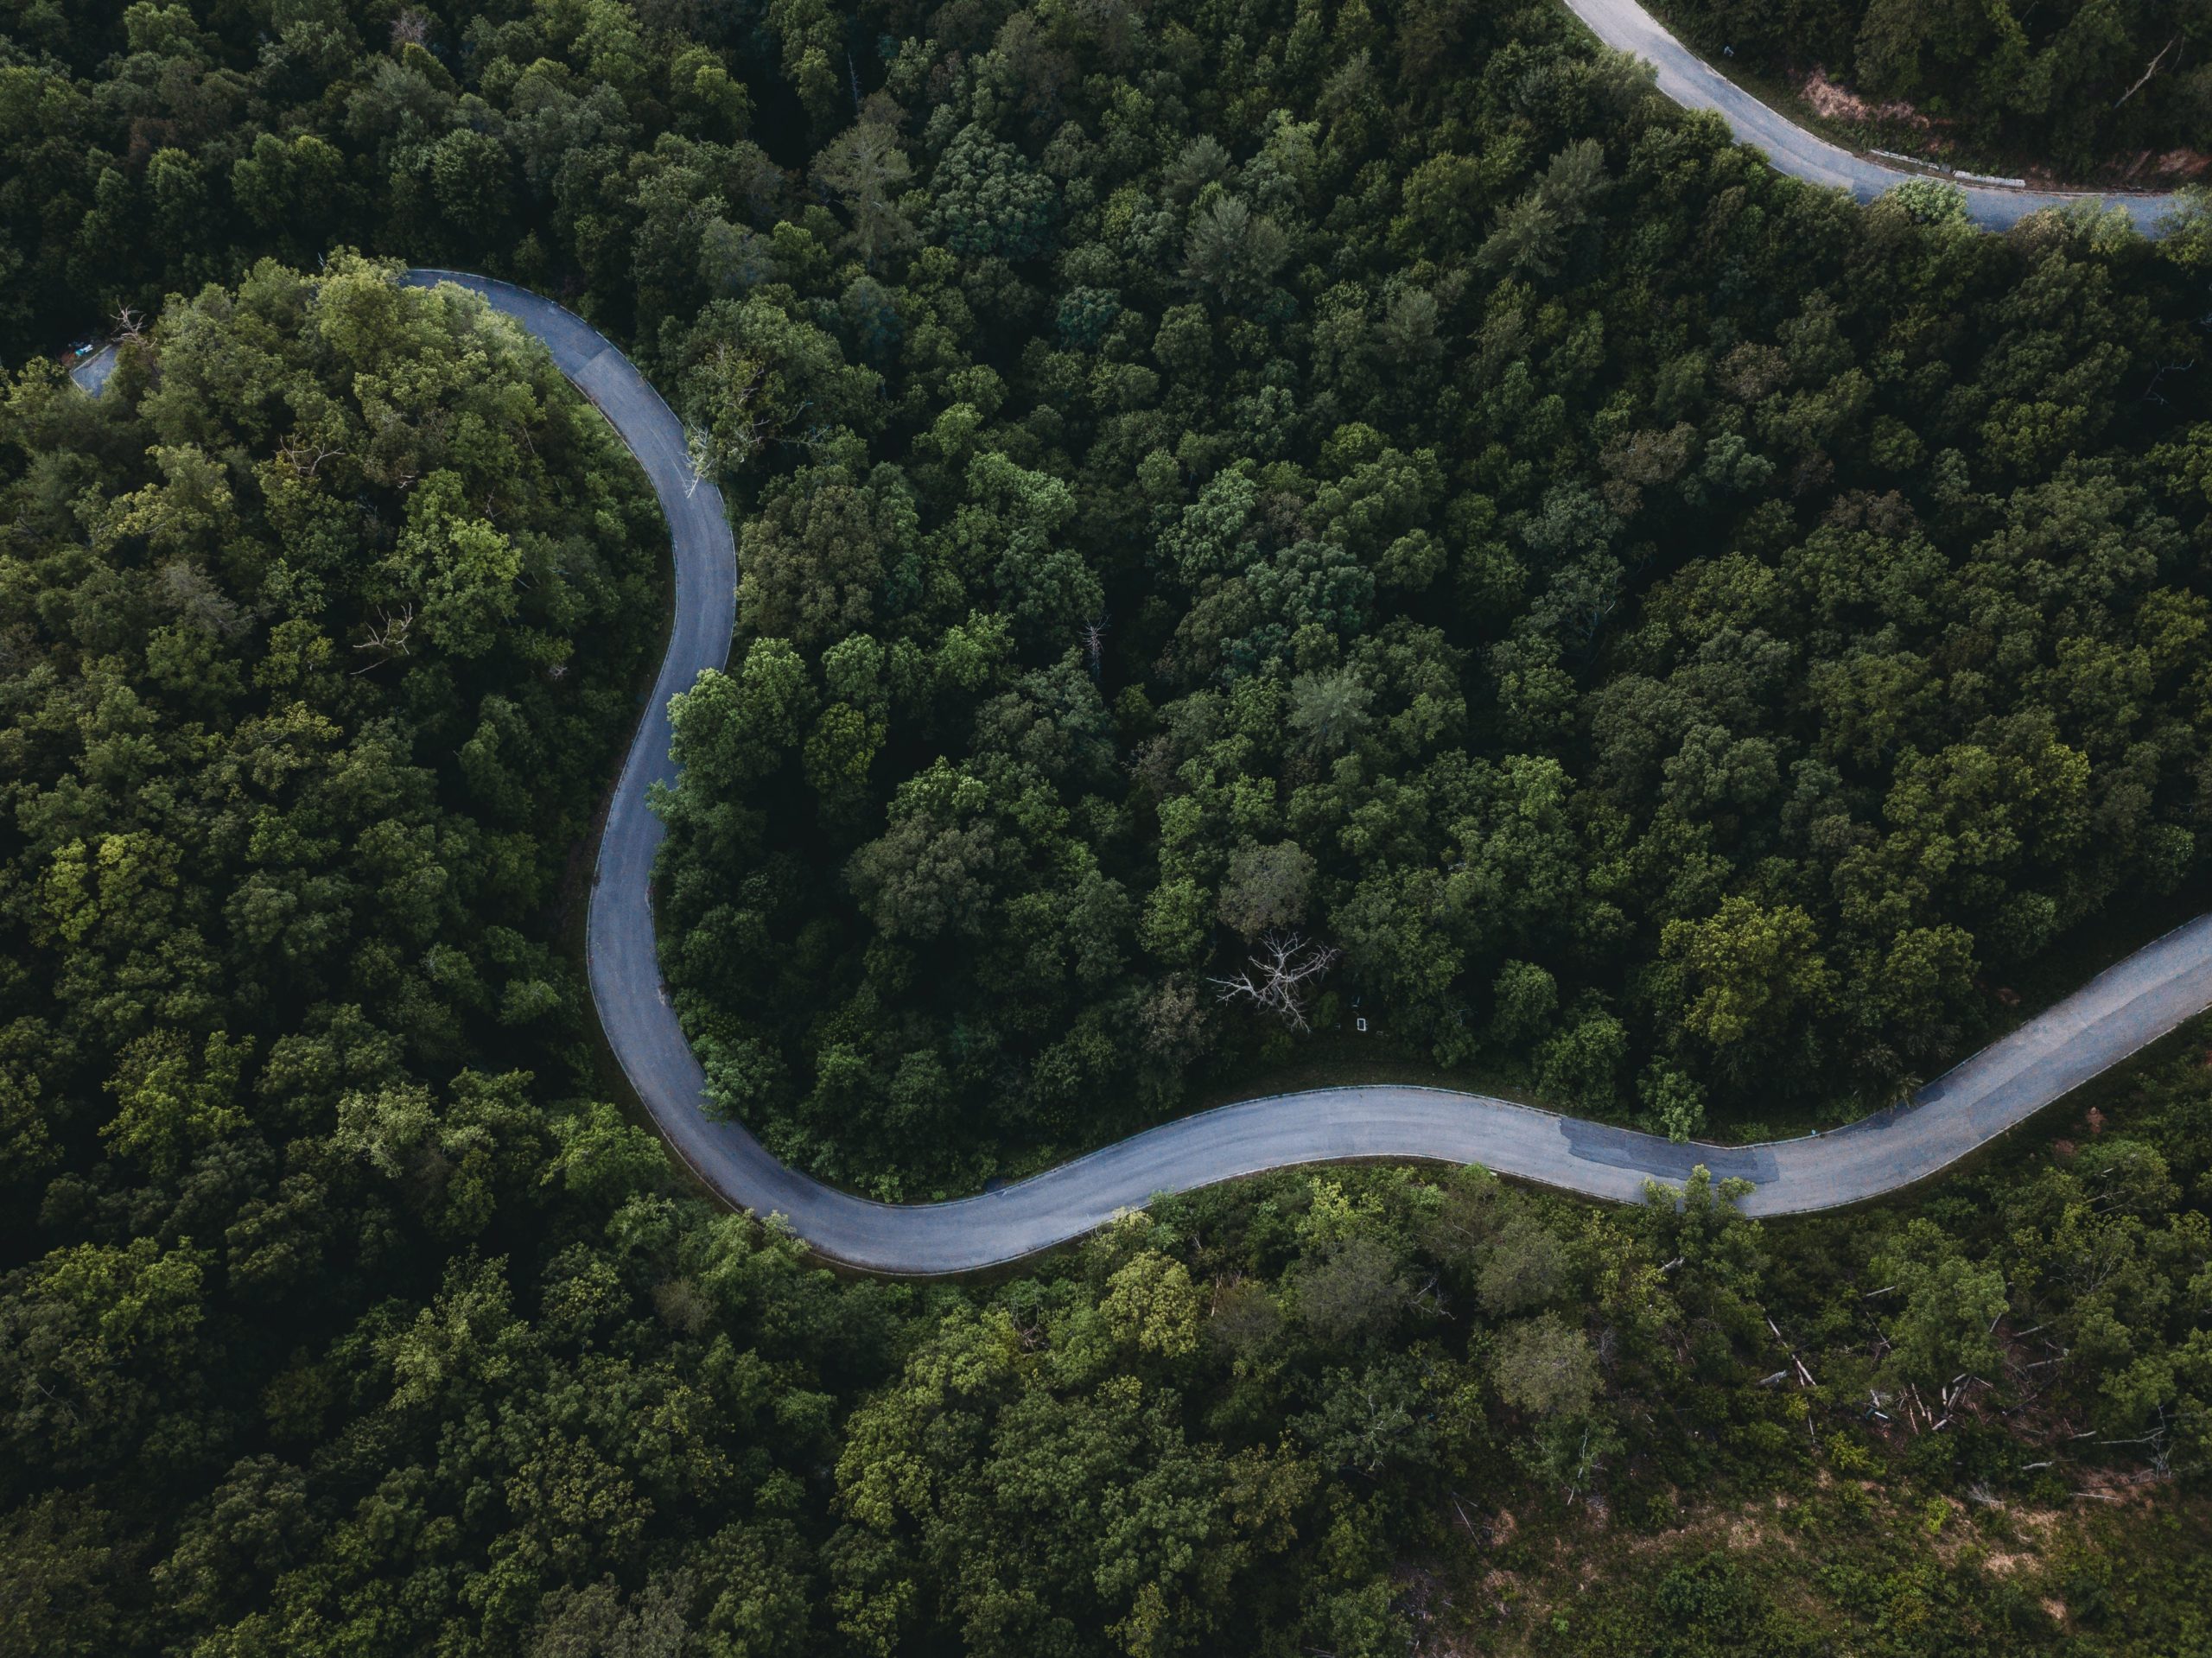 An aerial view of a winding roadmap in the forest.